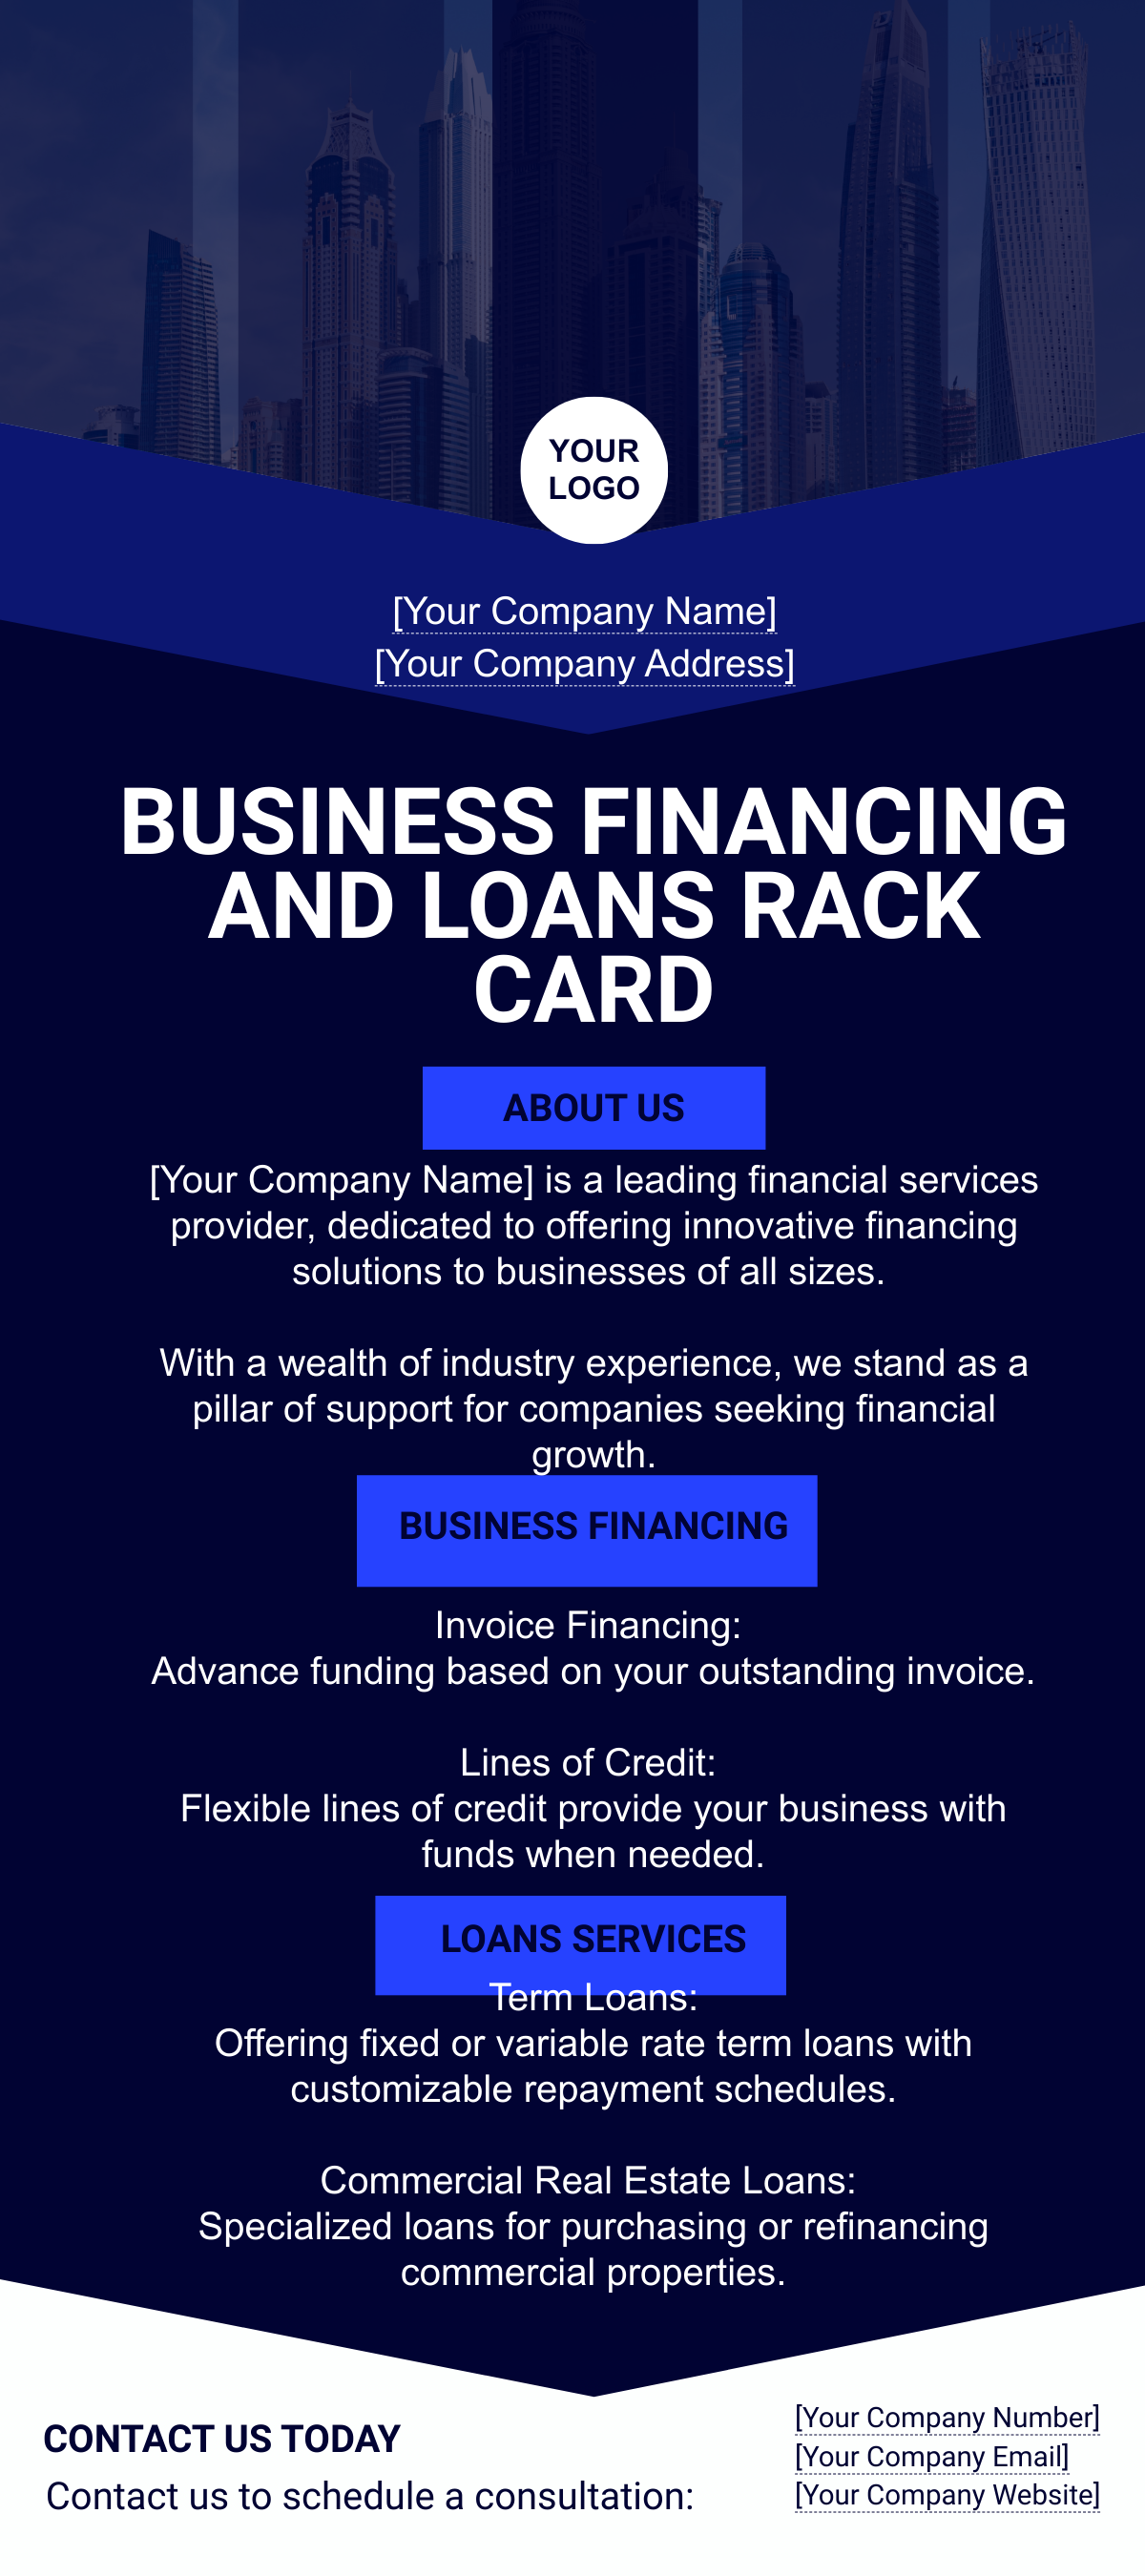 Free Business Financing and Loans Rack Card Template